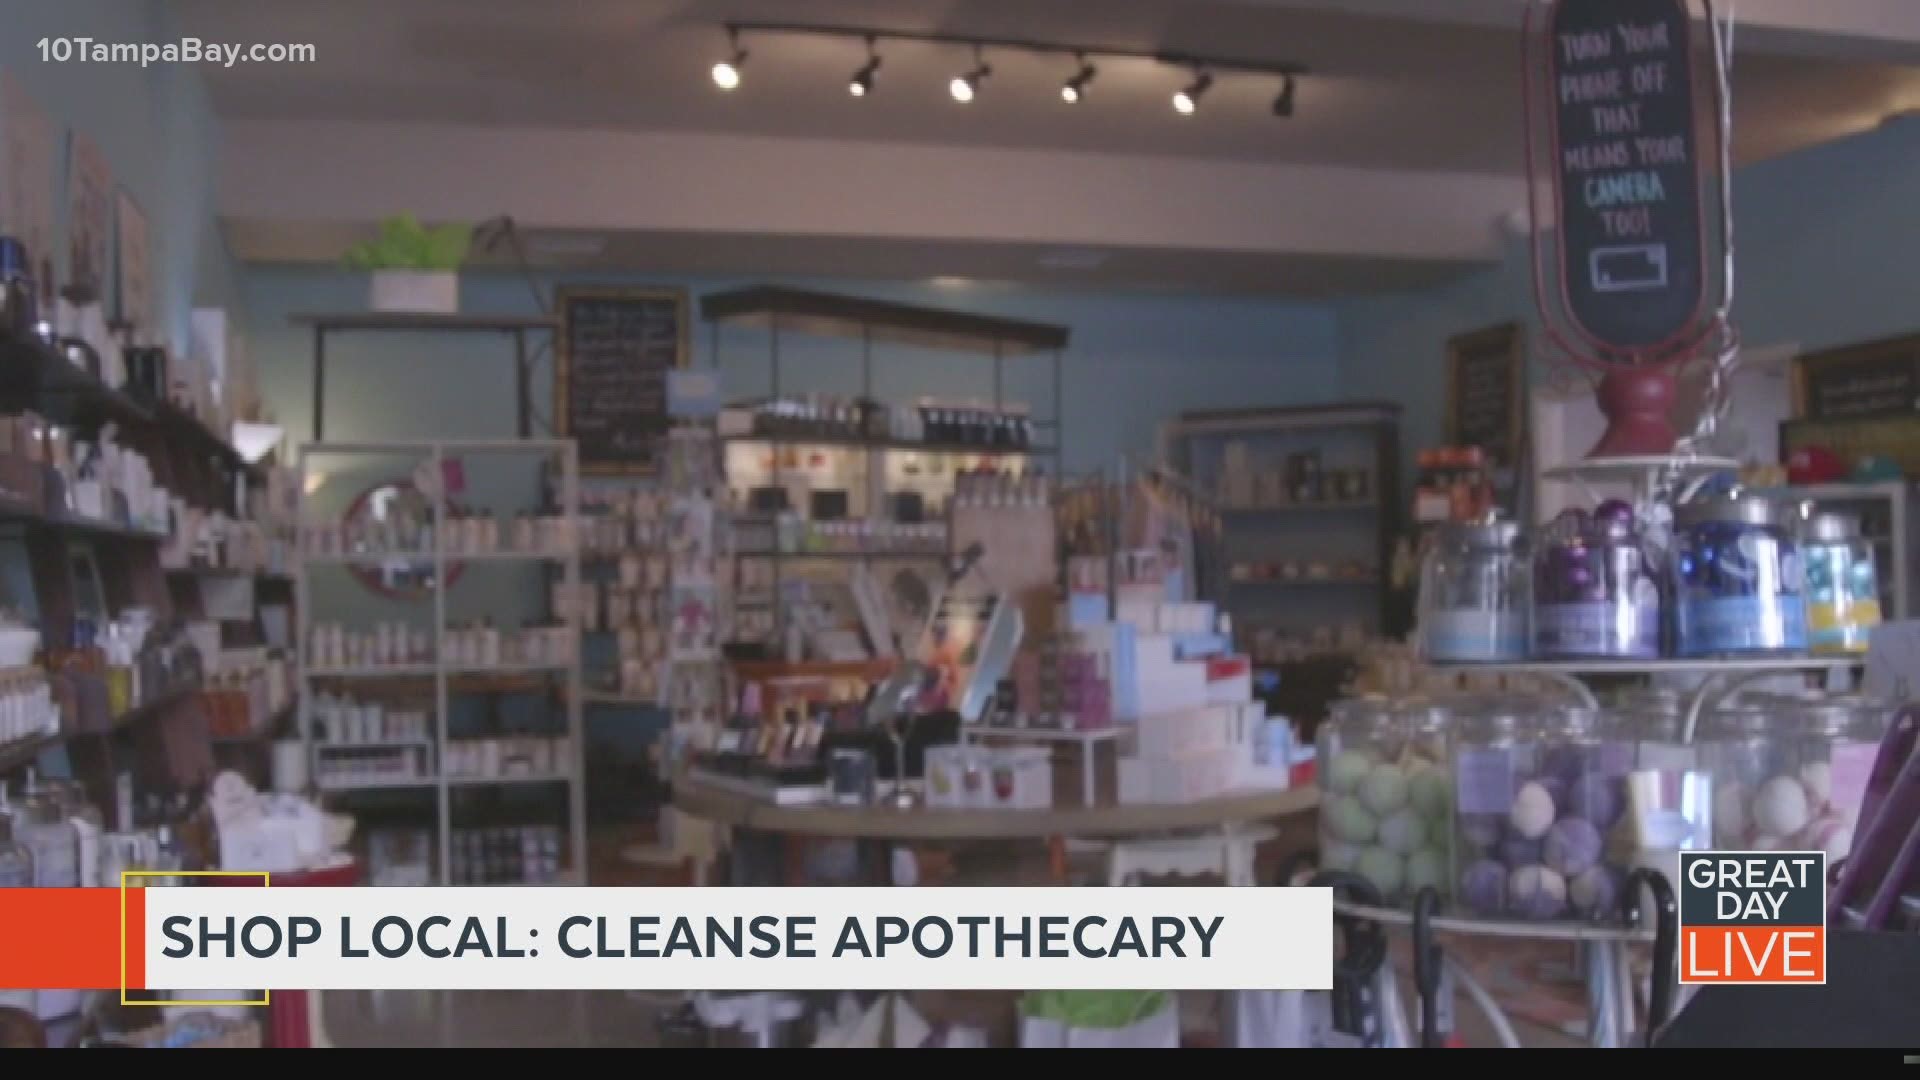 For all your self-care needs, take a relaxing journey through this Seminole Heights small business.